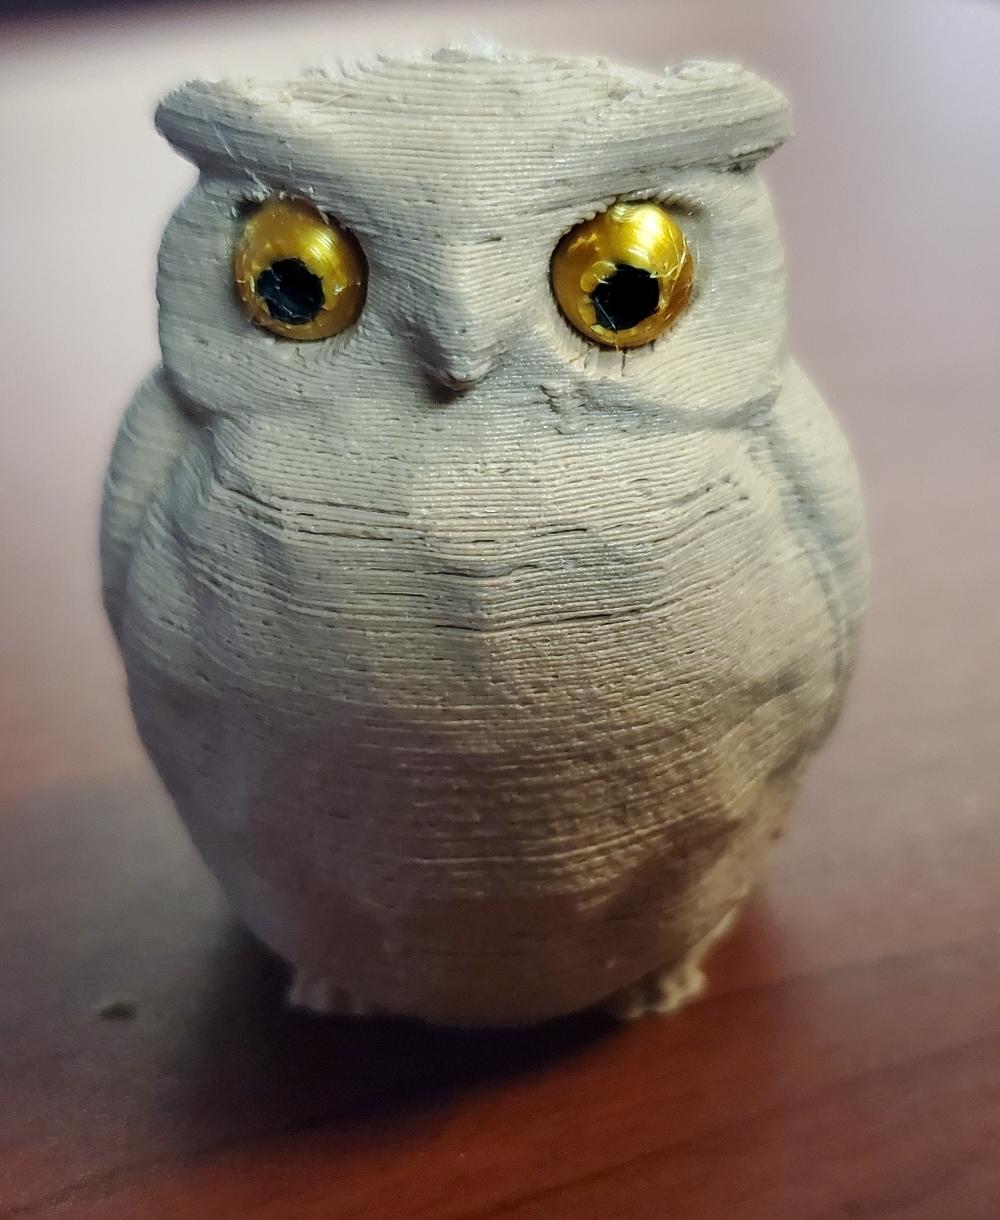 Little Owl (separate push-in-place eyes) - Wood pla filament with gold silk metallic pla for the eyes - 3d model